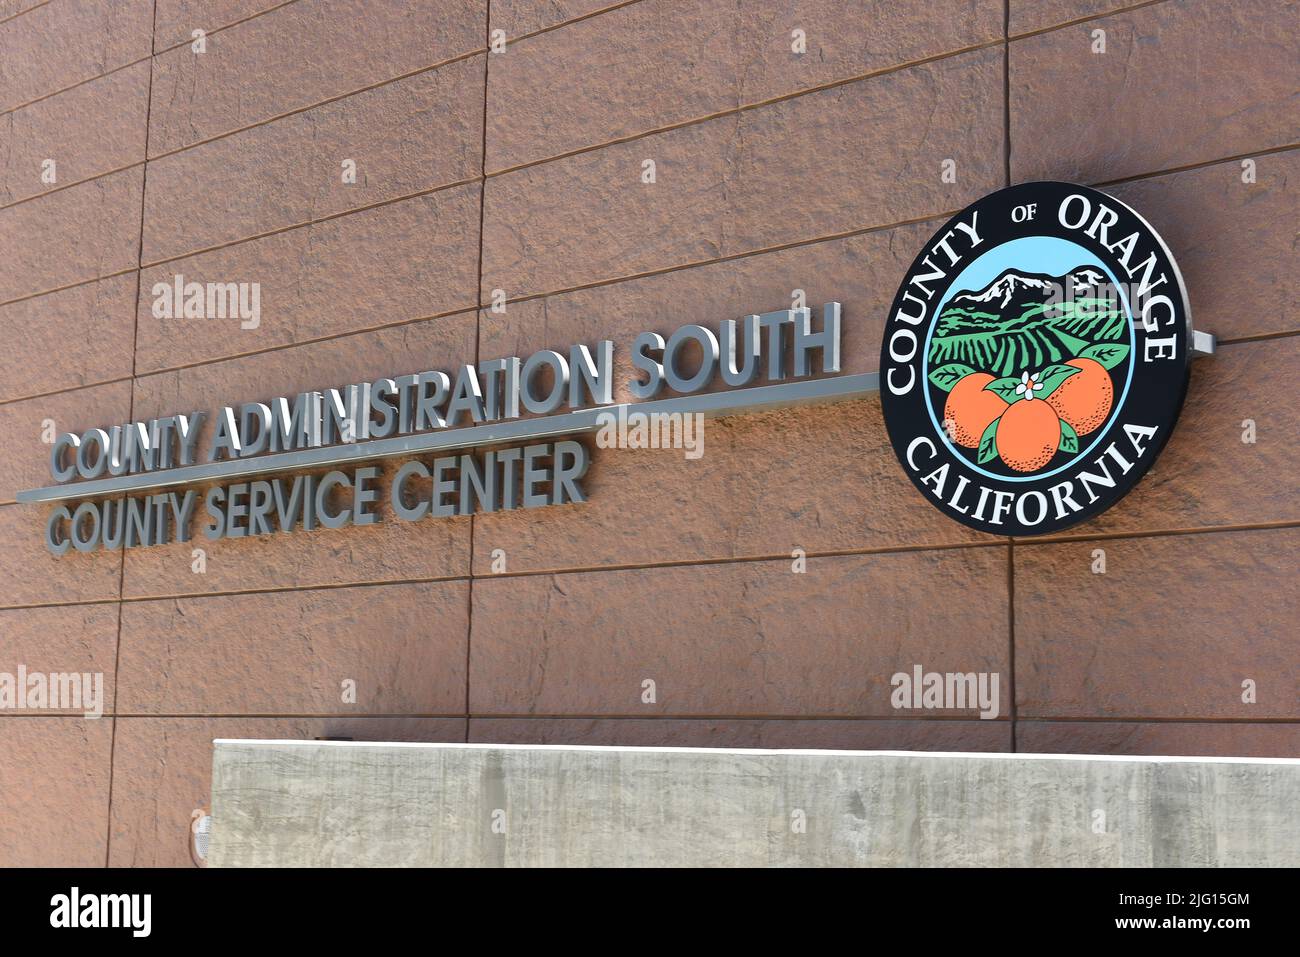 SANTA ANA, CALIFORNIA - 4 JUL 2022: Sing at the Orange County Administration South building in the Civic Center. Stock Photo